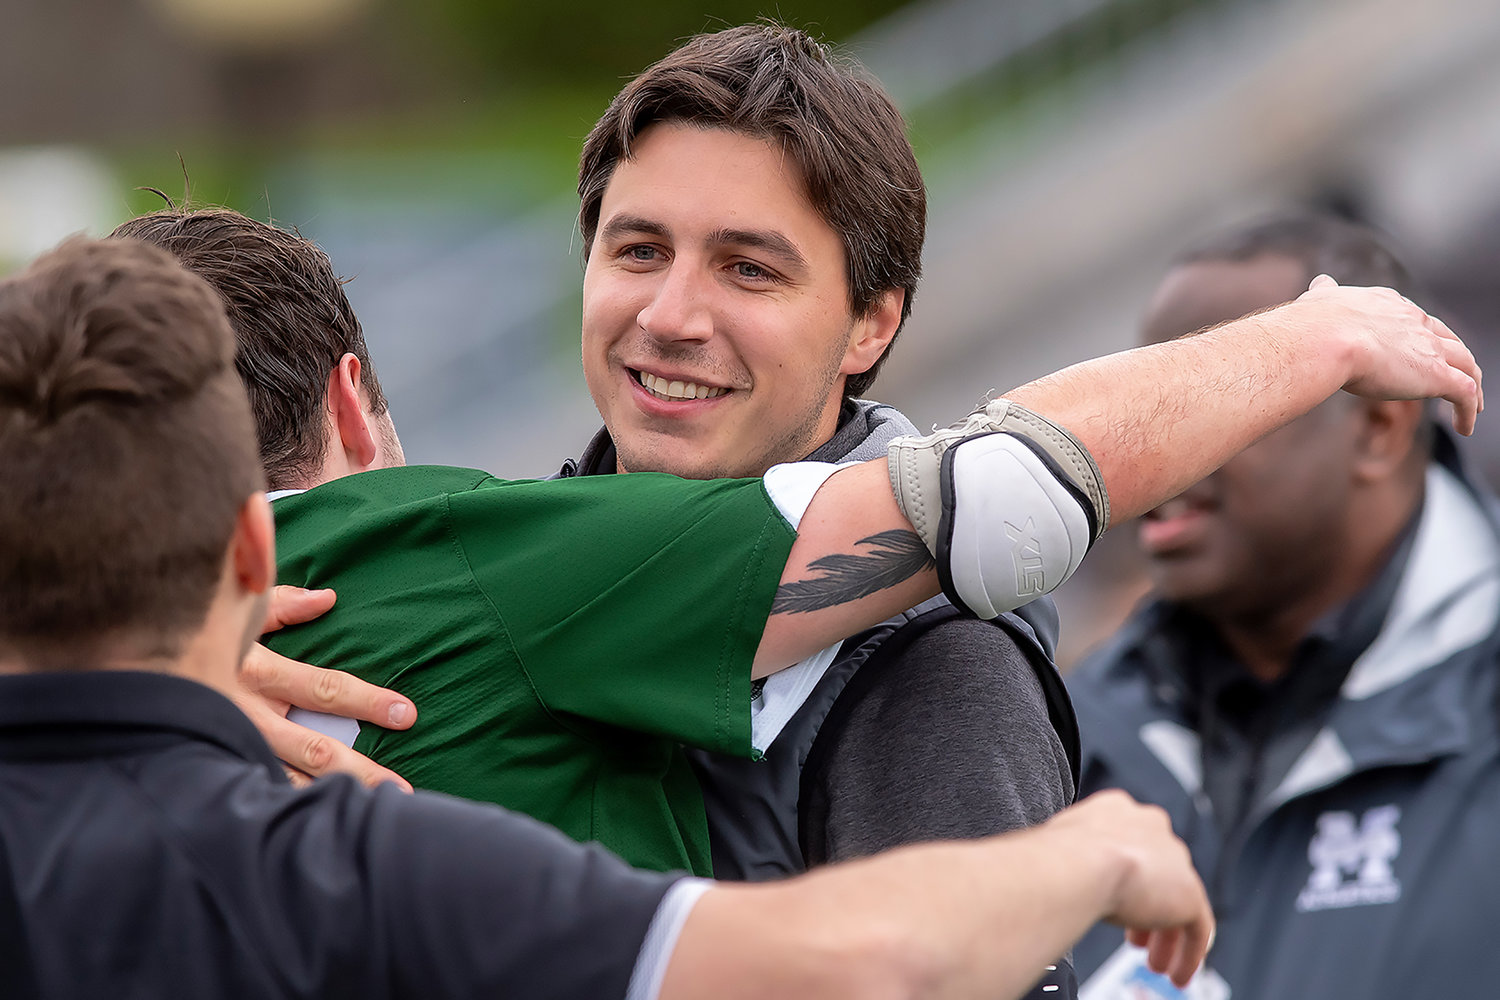 John Odierna, the new head coach of the defending MAAC men’s lacrosse champions, was promoted from assistant after Drew Kelleher left for Umass-Lowell in the offseason.